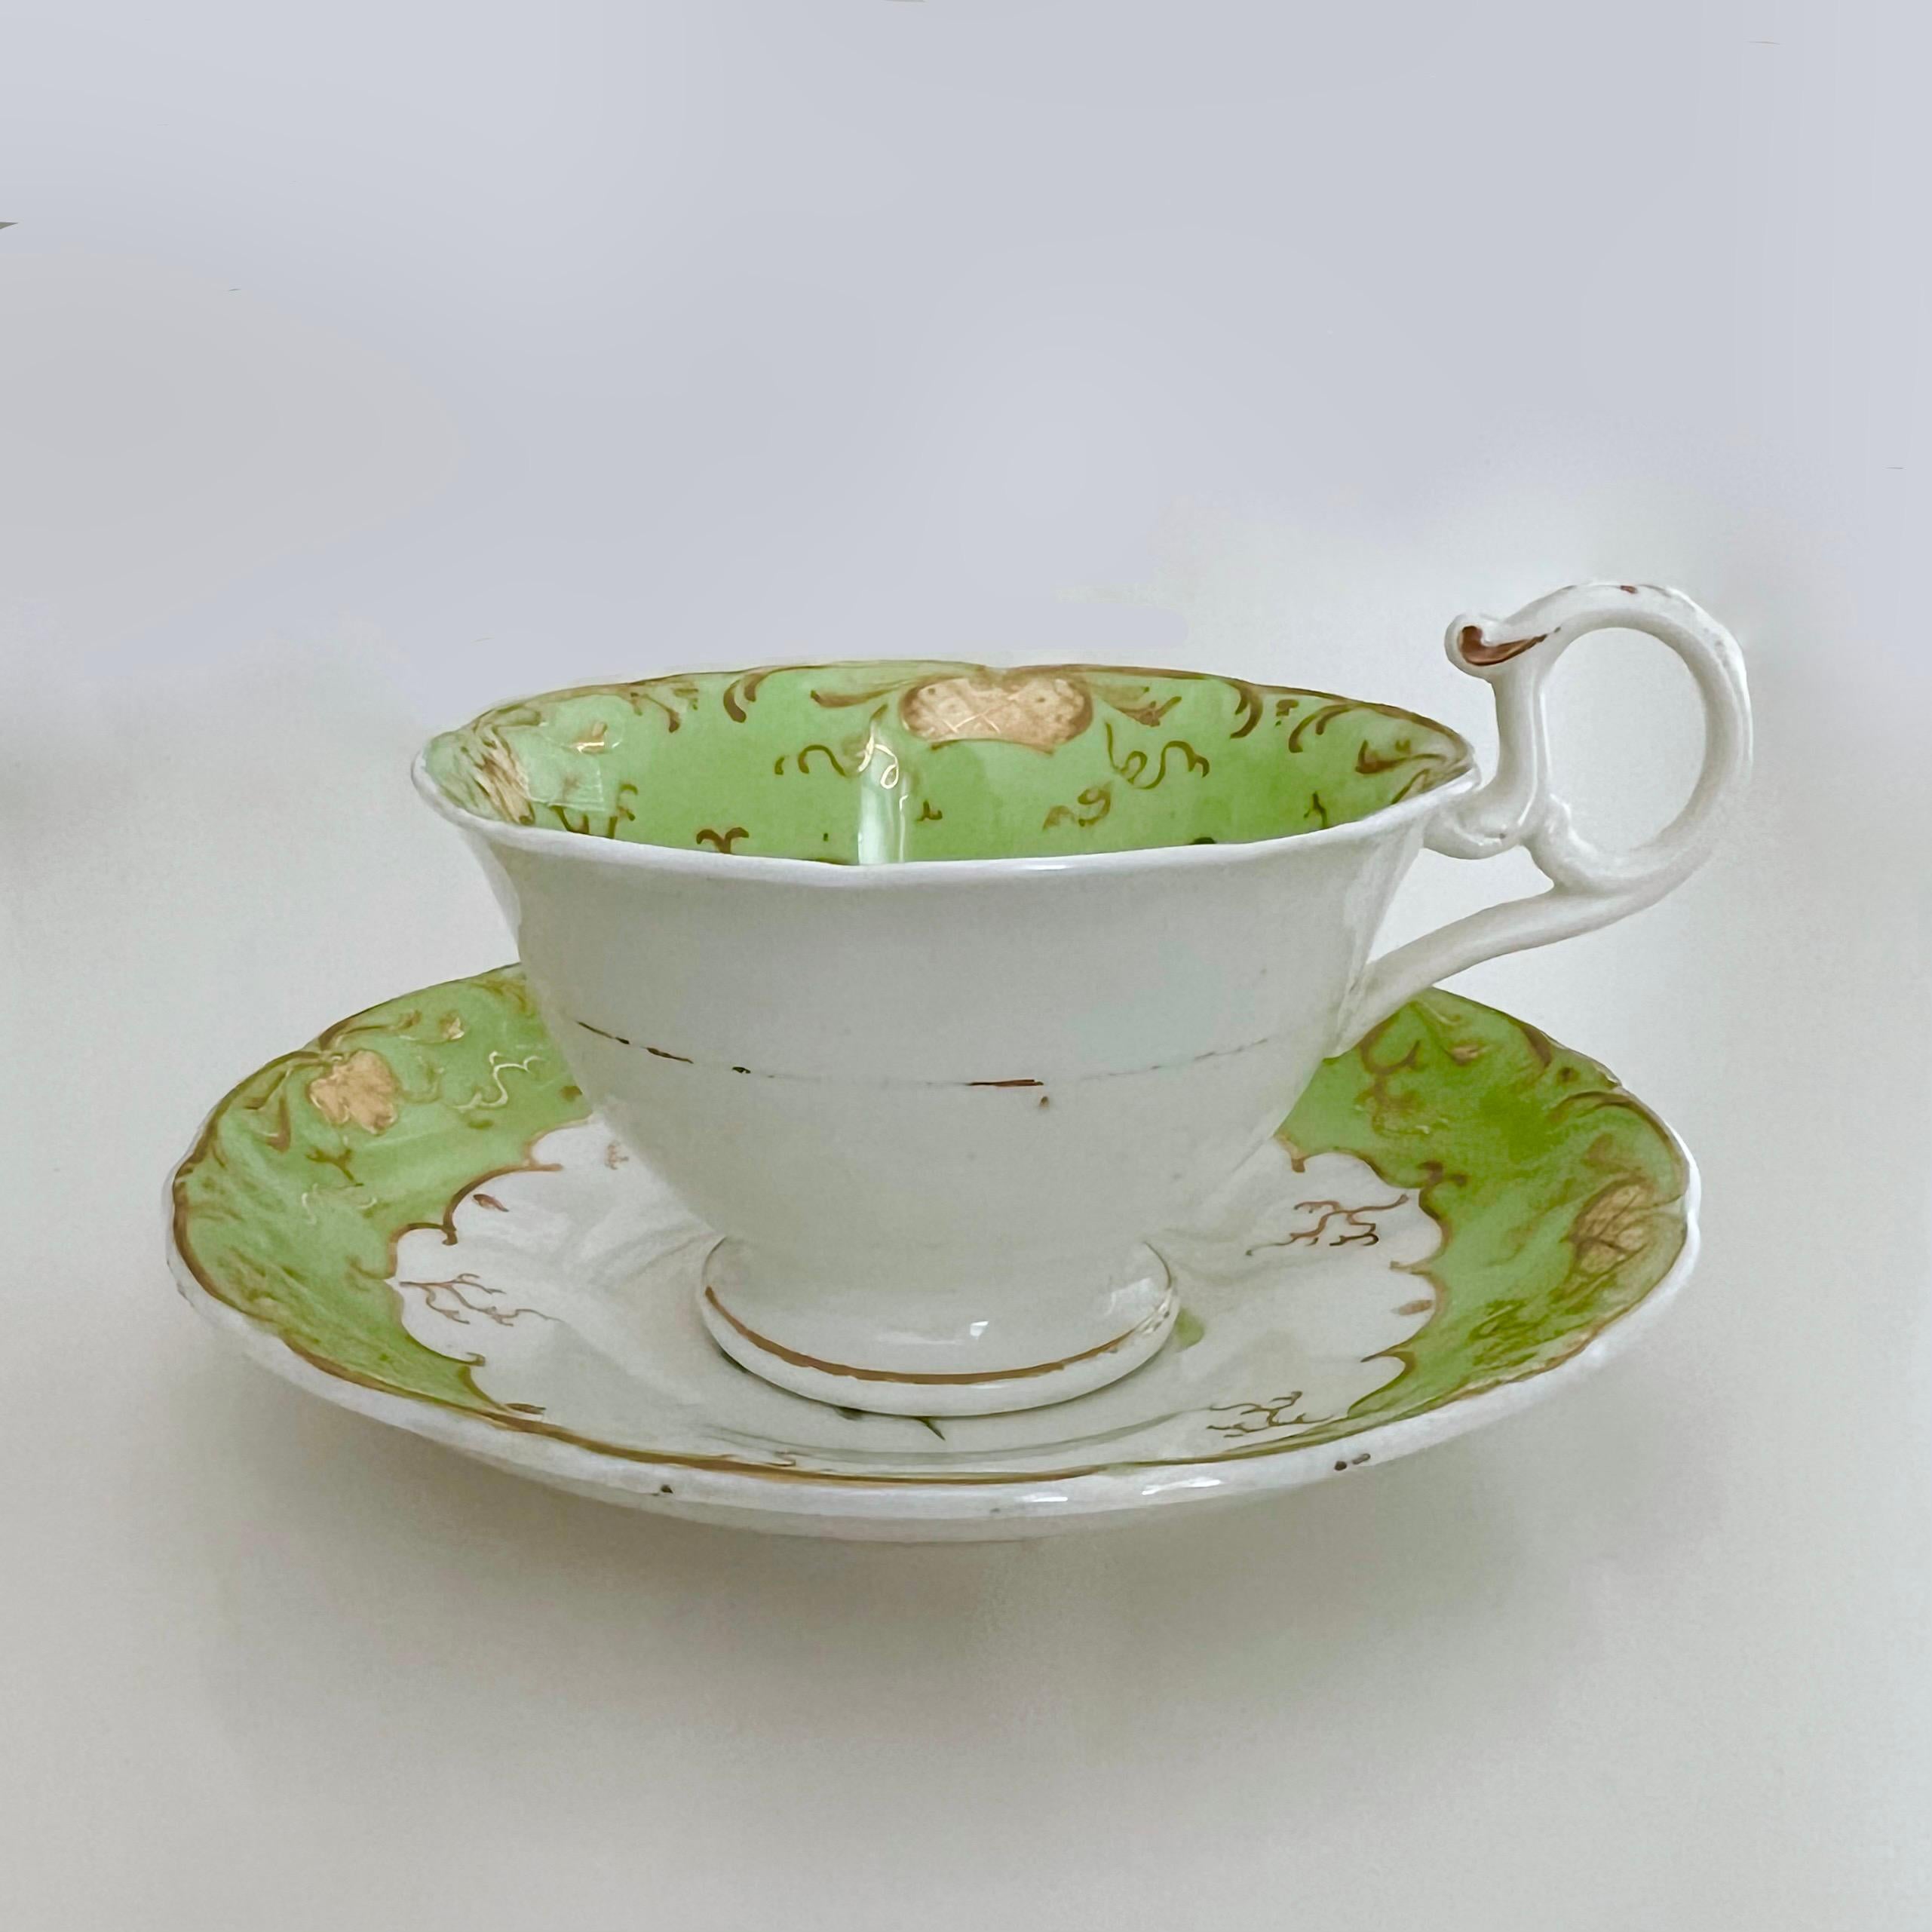 H & R Daniel Porcelain Teacup, Apple Green with Pink Roses, Rococo Revival C1840 5